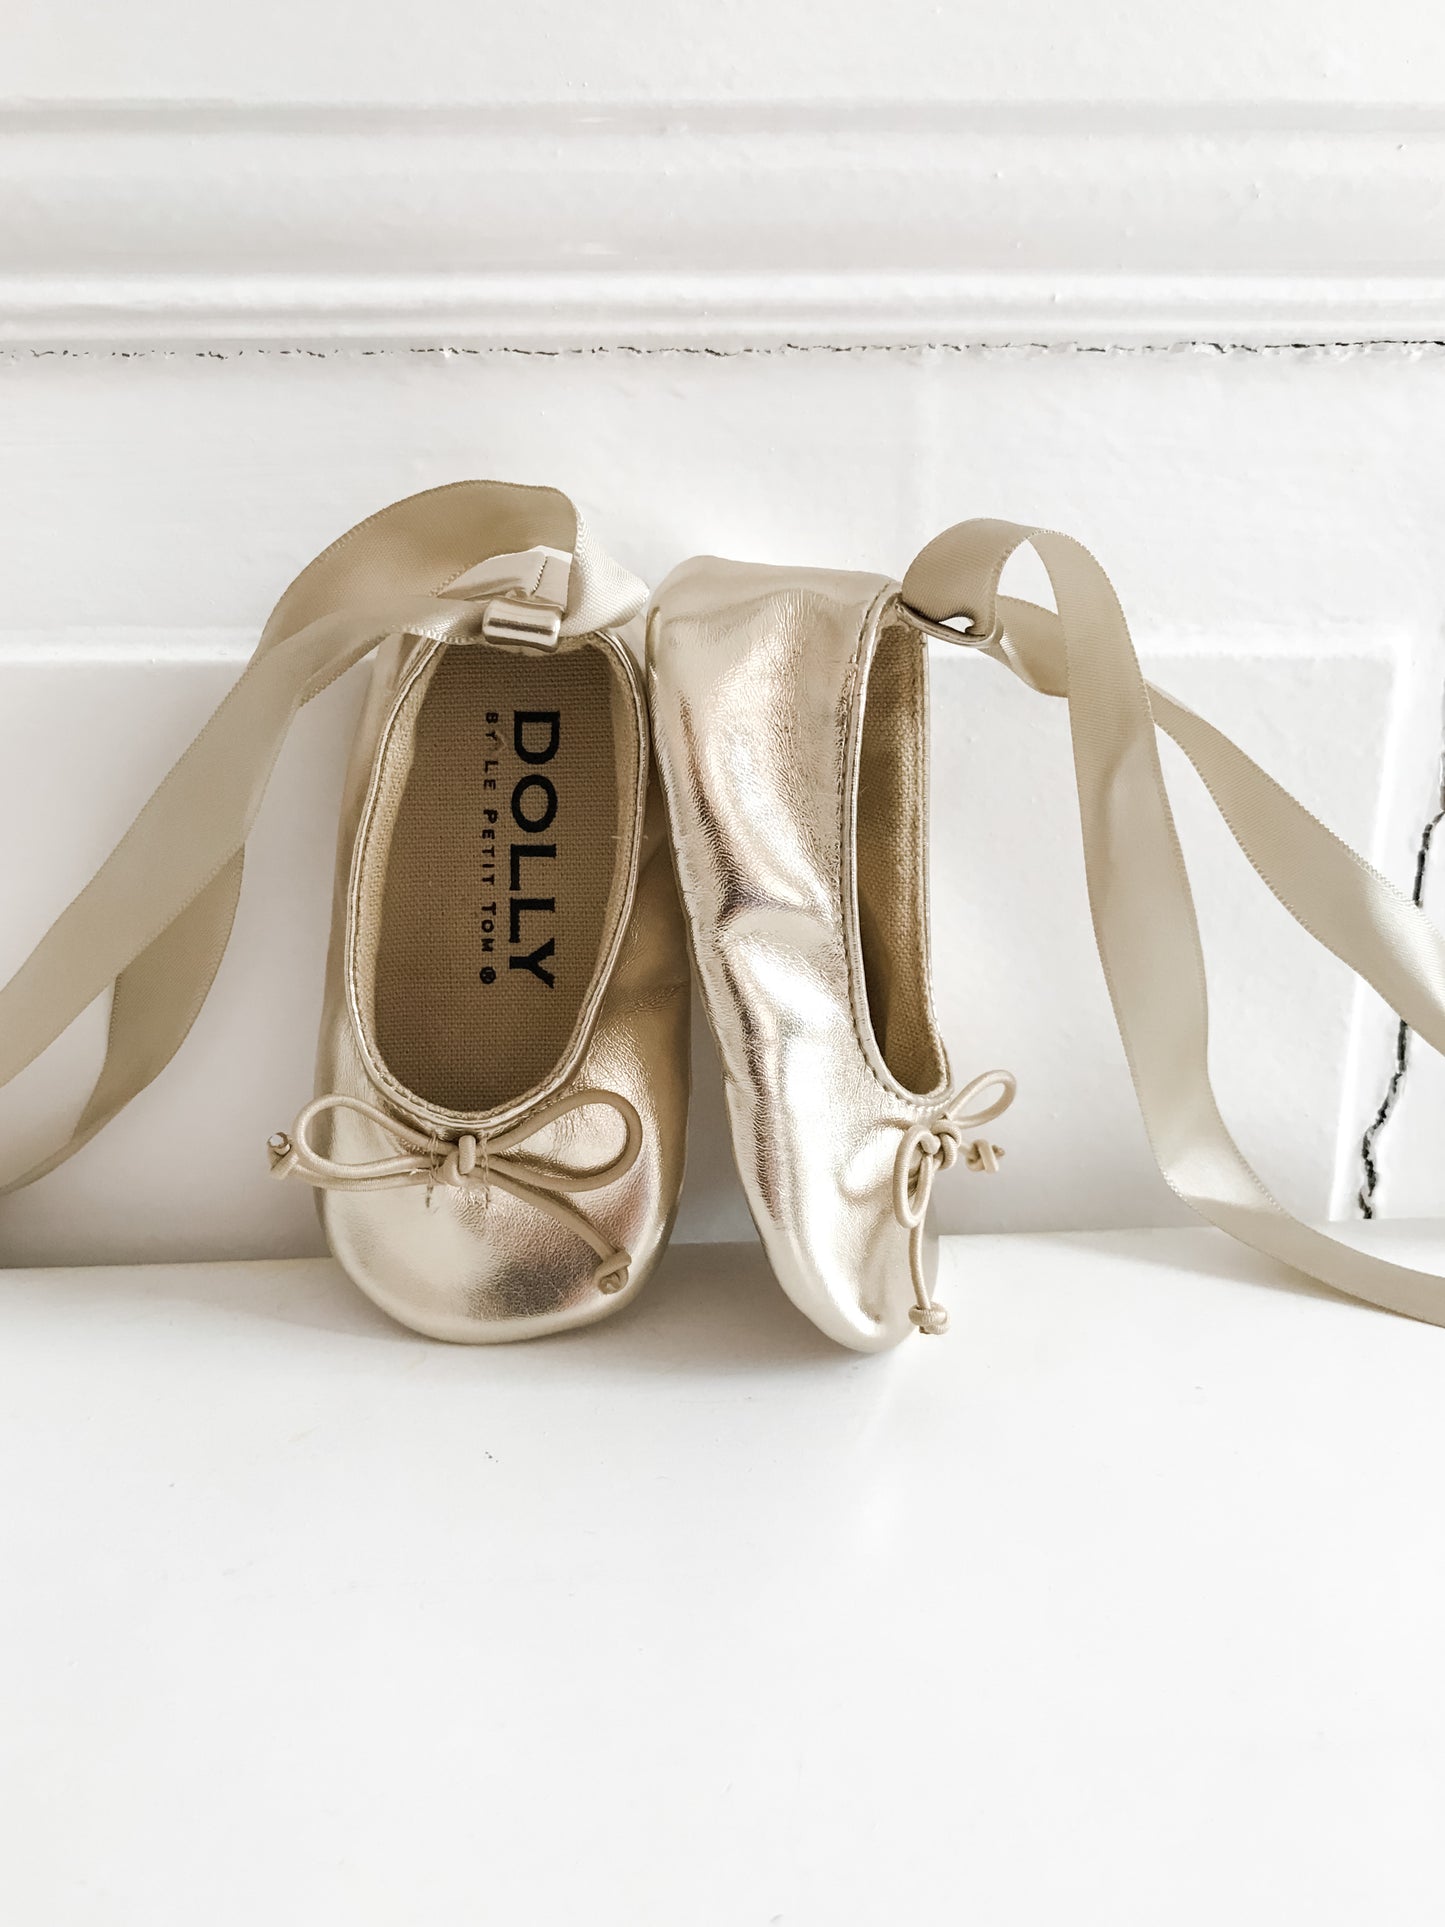 DOLLY by Le Petit Tom ® BABY BALLERINAS WITH RIBBONS gold